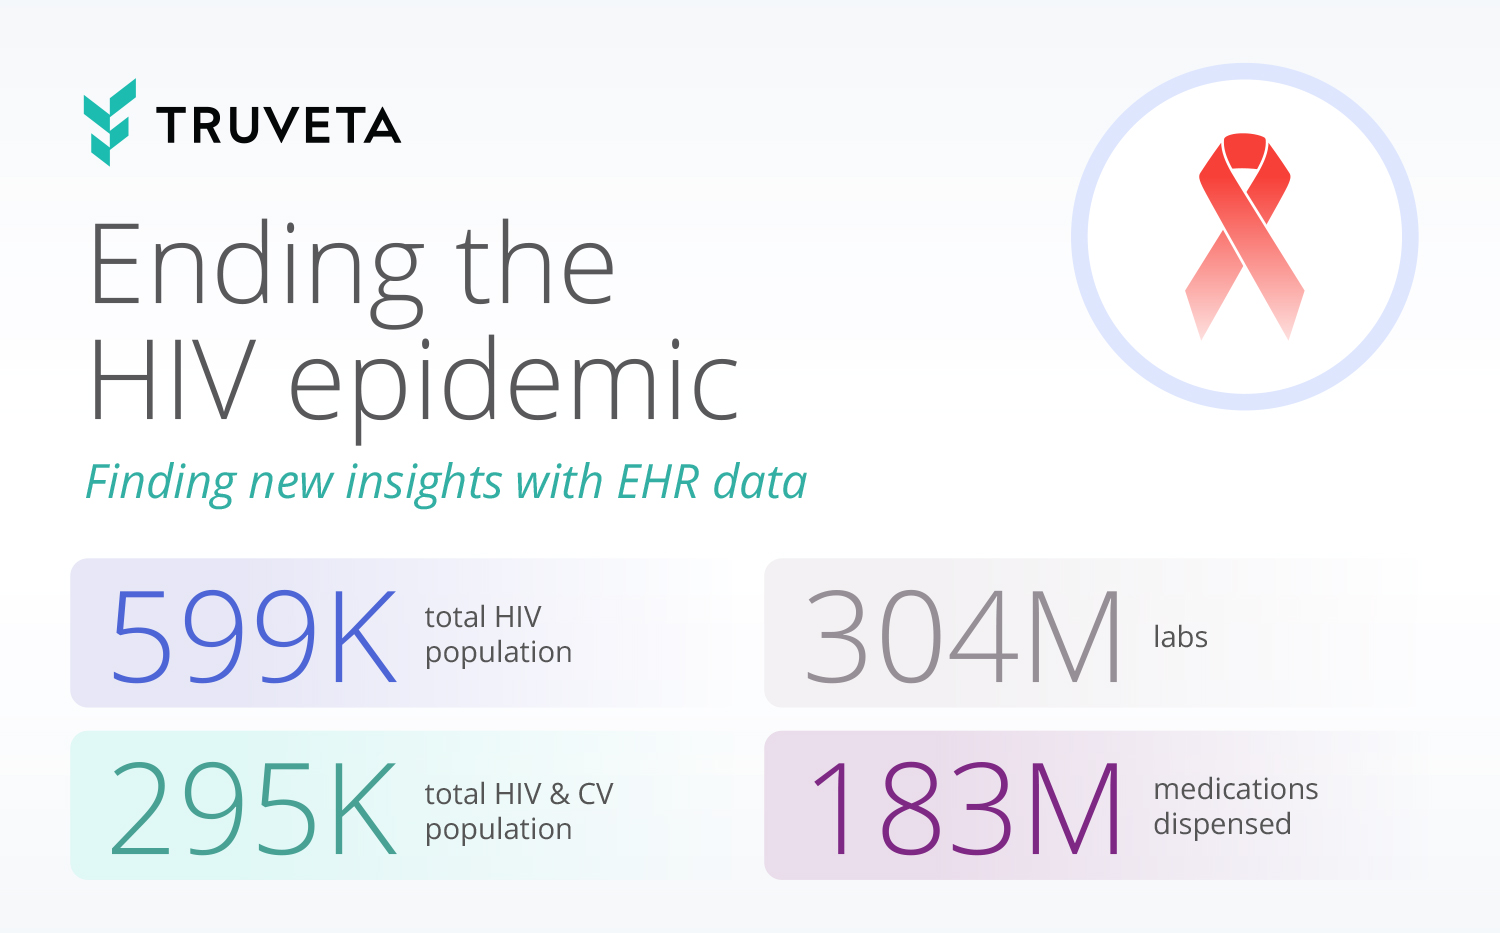 Ending the HIV epidemic using EHR data analytics. See how a leading health data company is making this a reality.